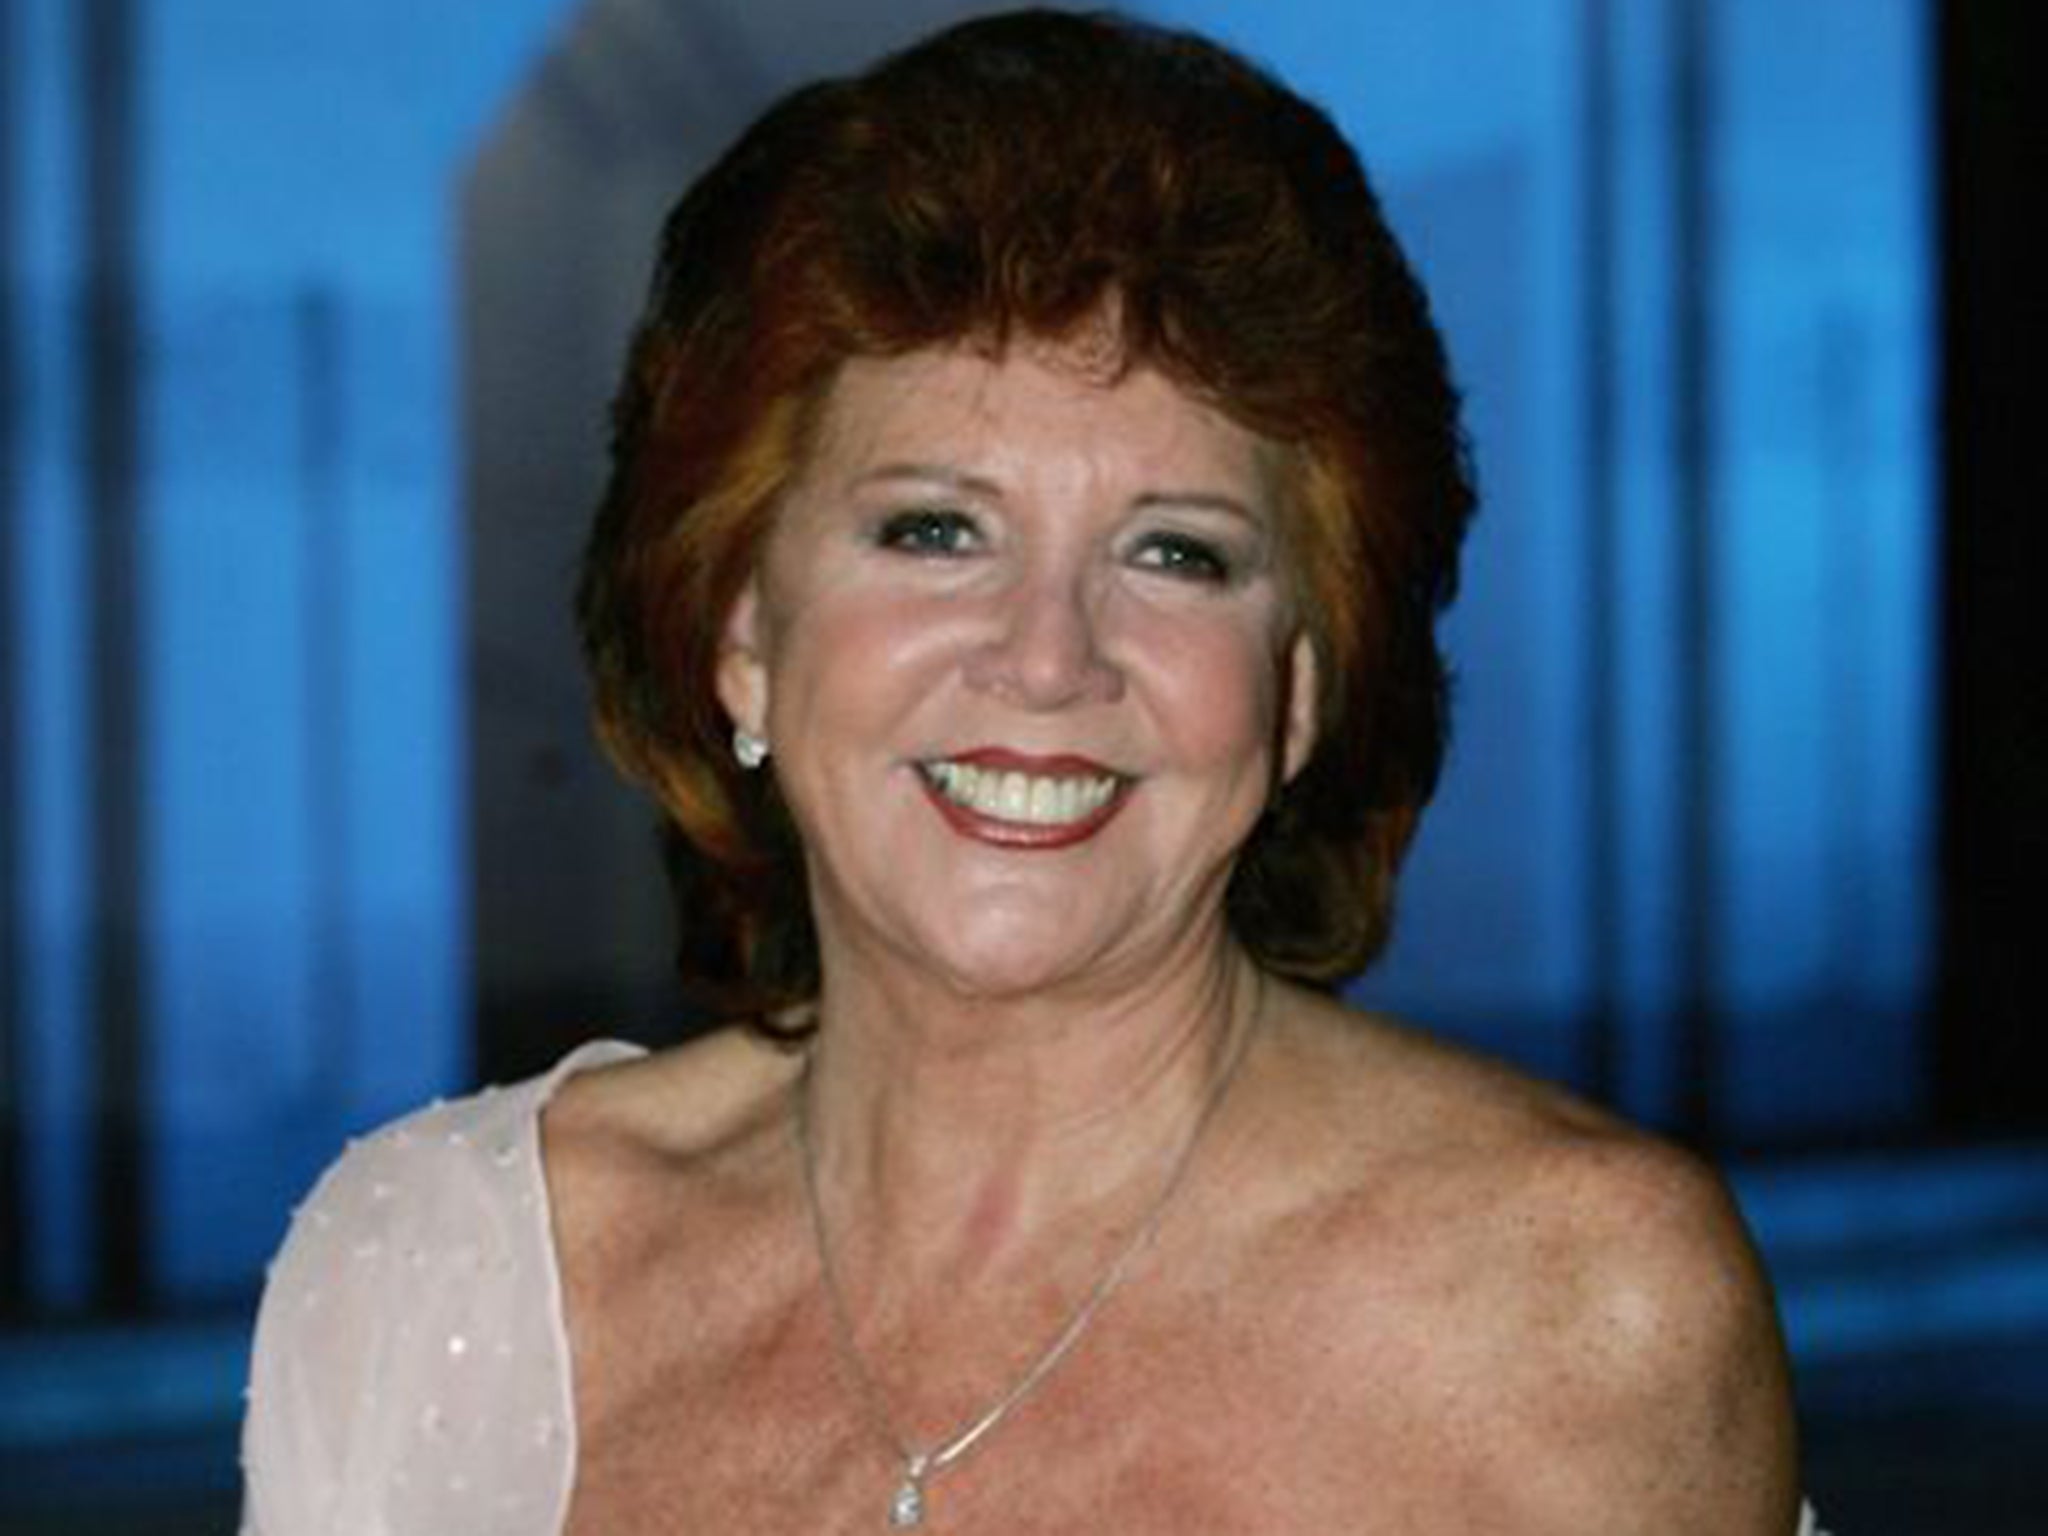 Cilla Black lived her life in front of the lens, whether on television or her earlier pop career